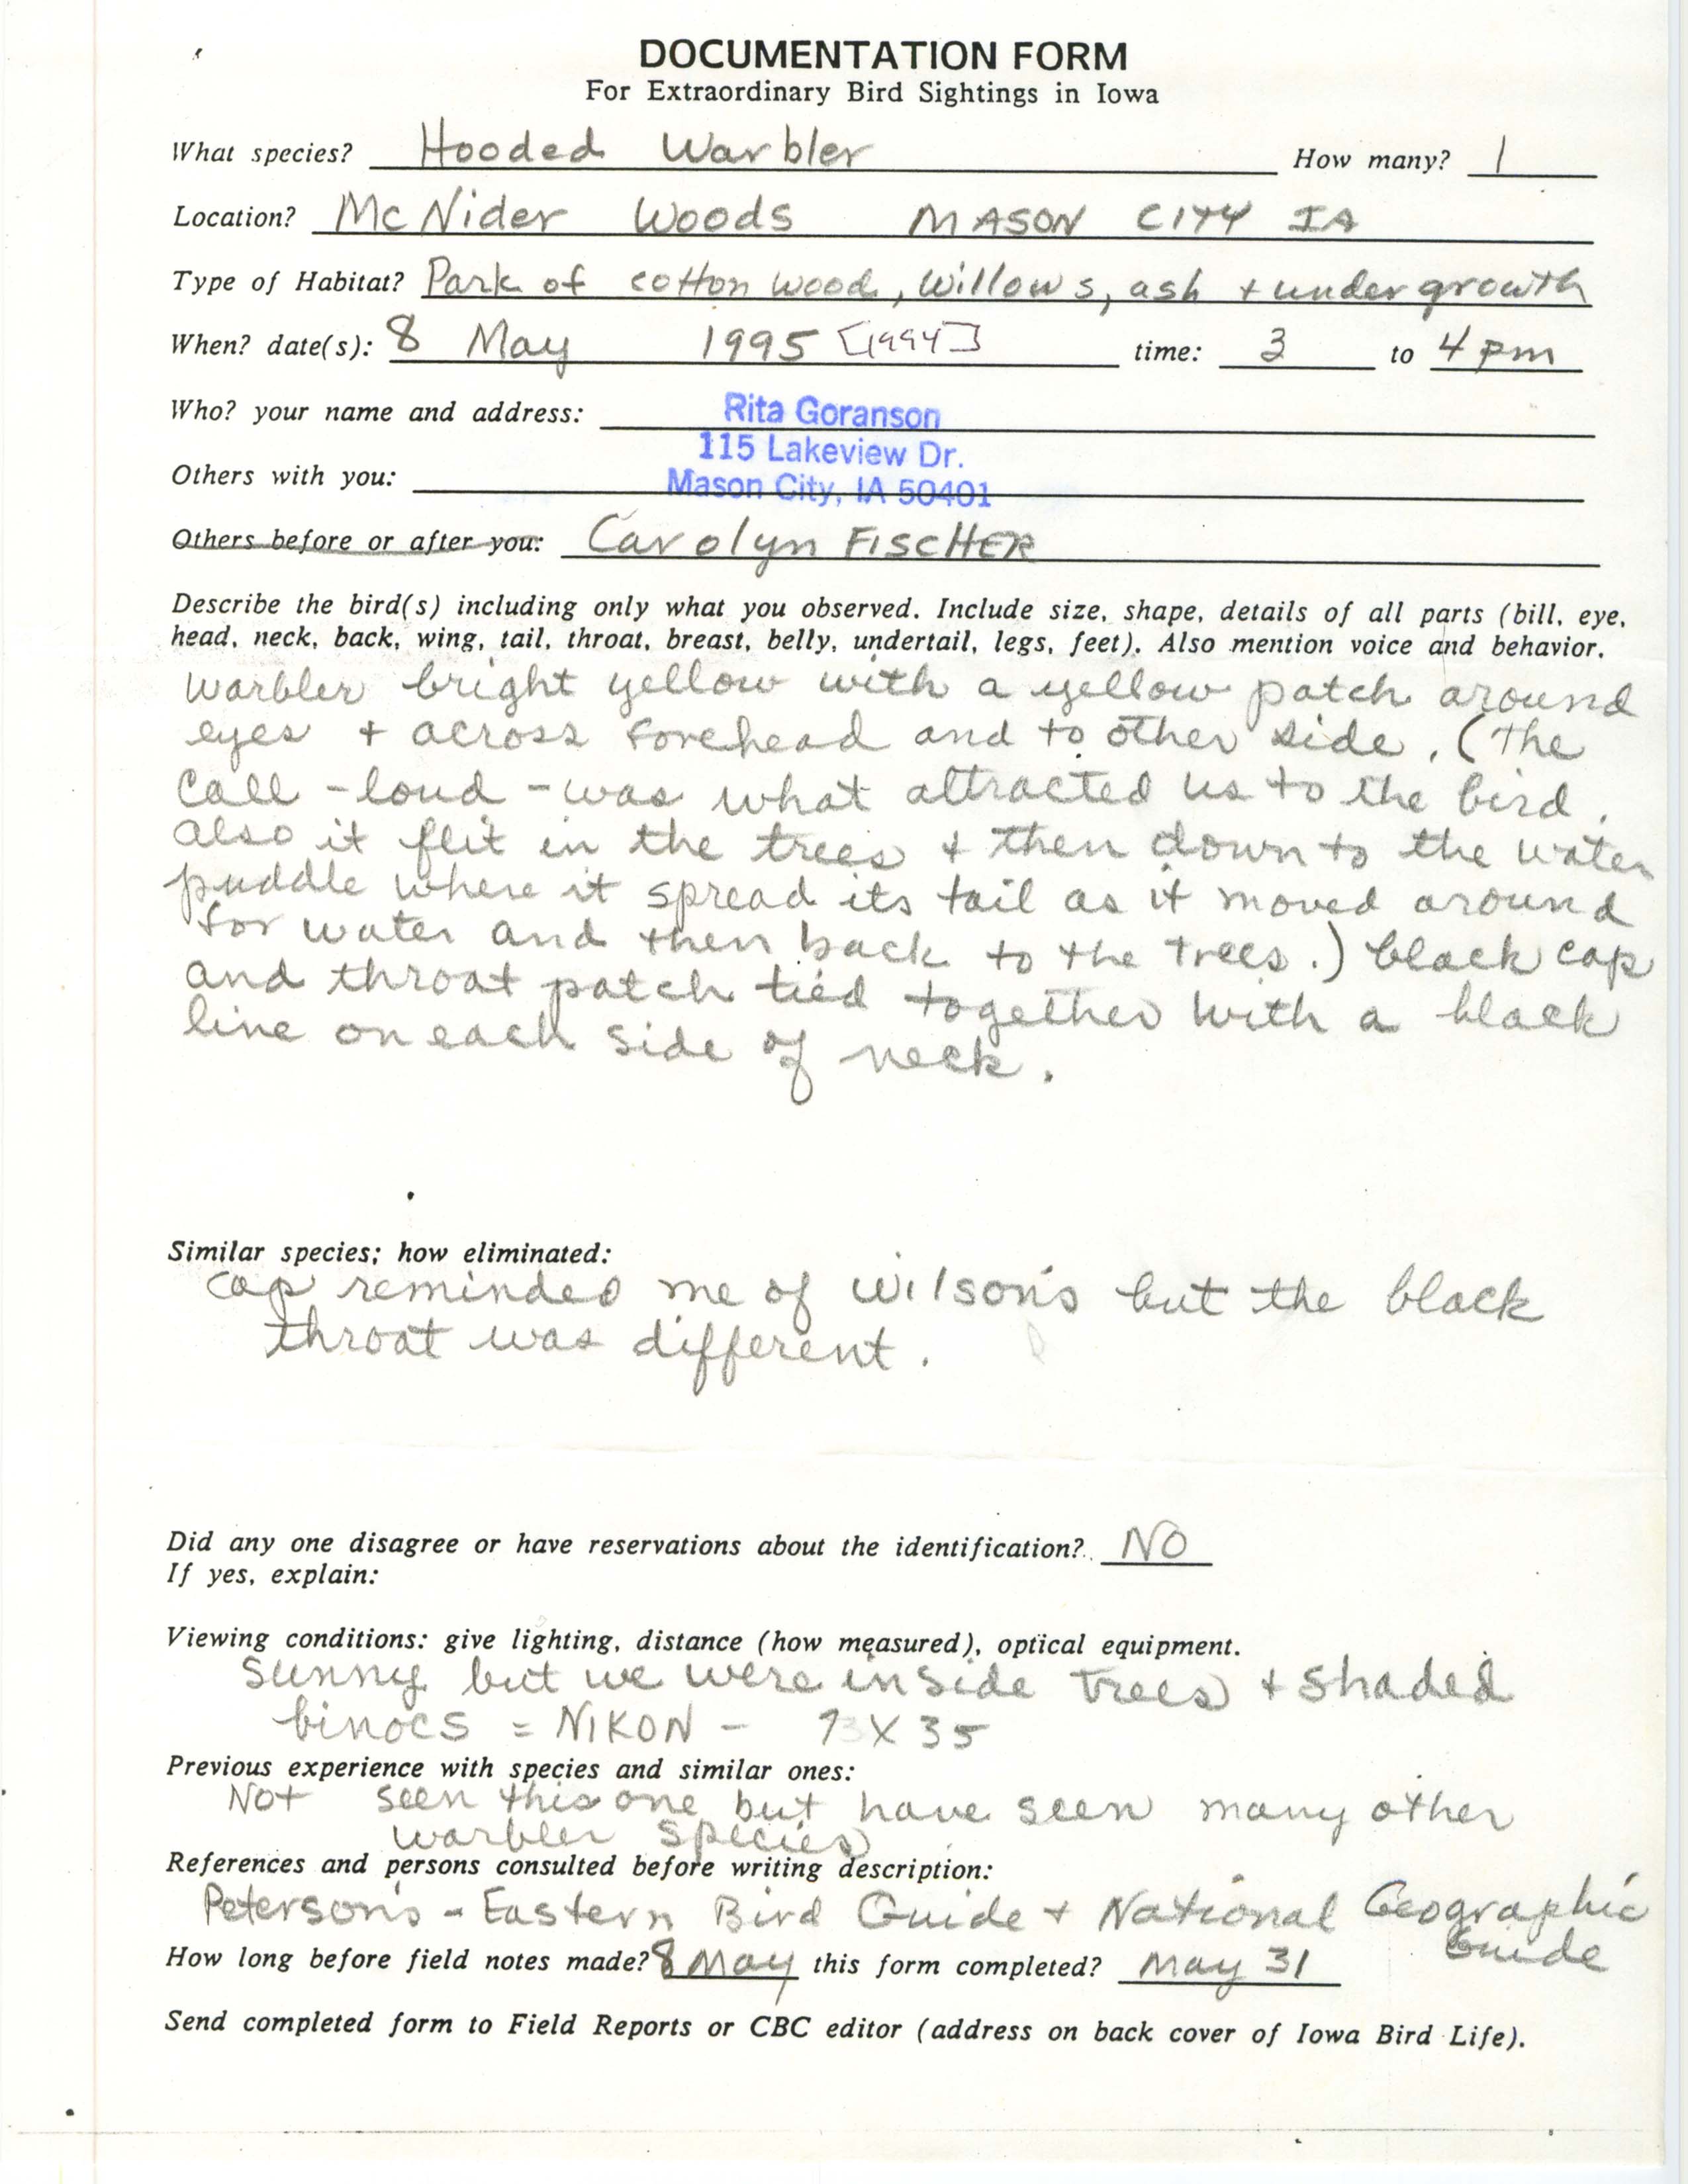 Rare bird documentation form for Hooded Warbler at MacNiders Woods in Mason City, 1994